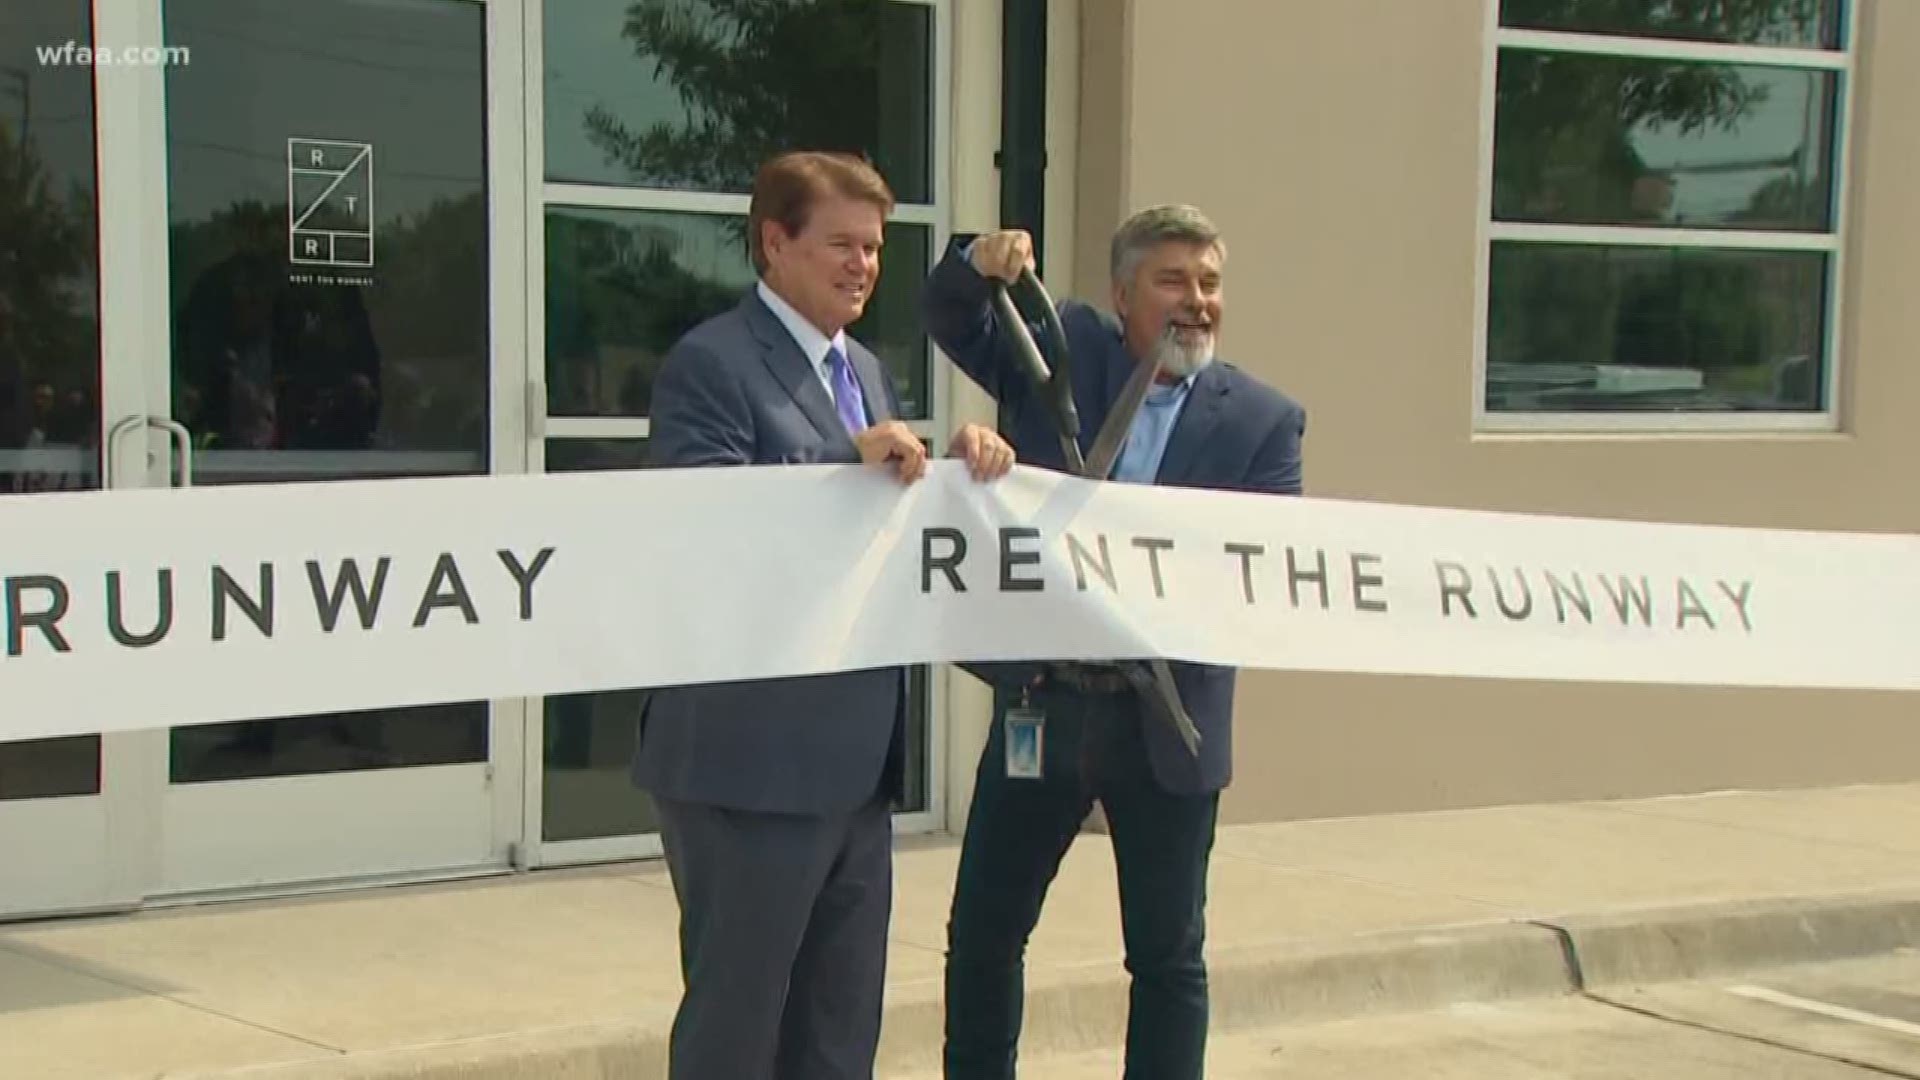 A popular online company is setting up shop in Arlington. The center will bring hundreds of new jobs to North Texas.